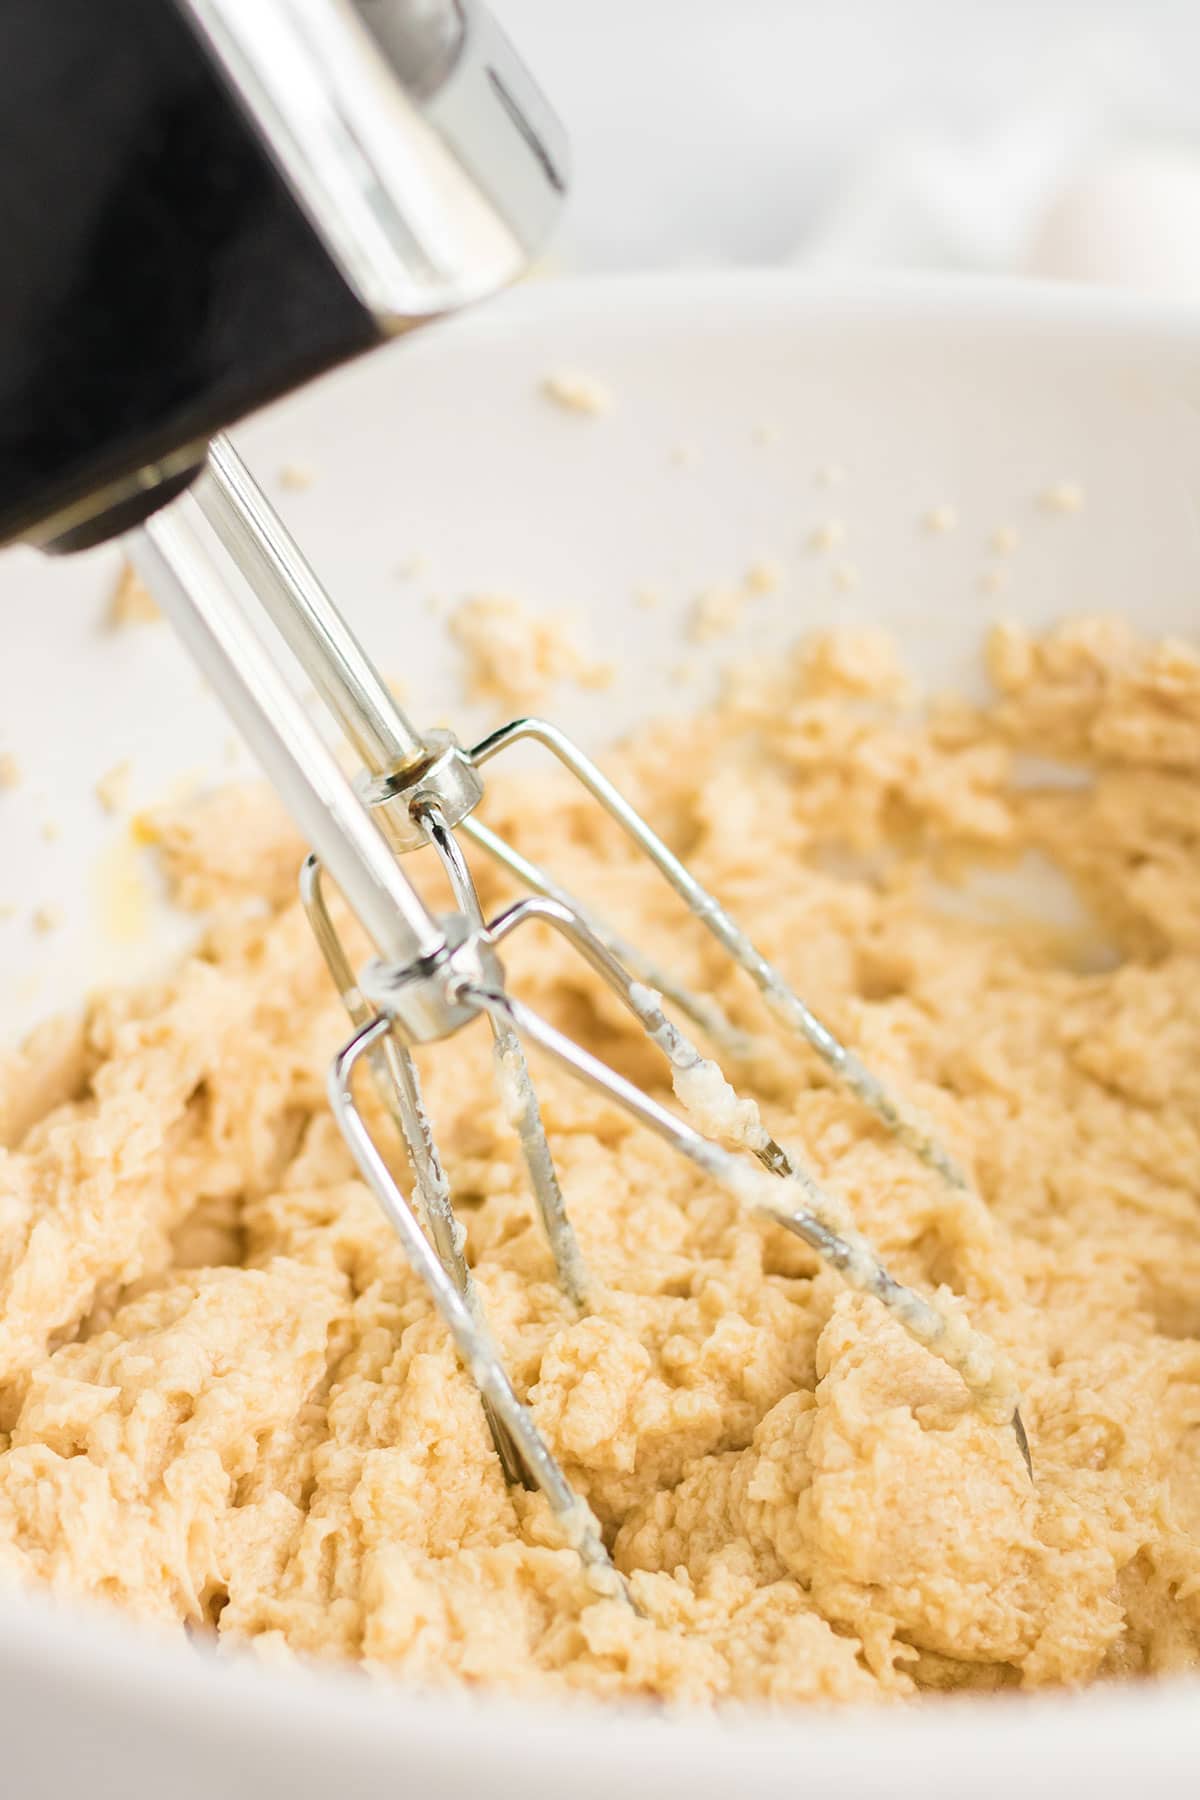 Mixing the batter with an electric mixer.